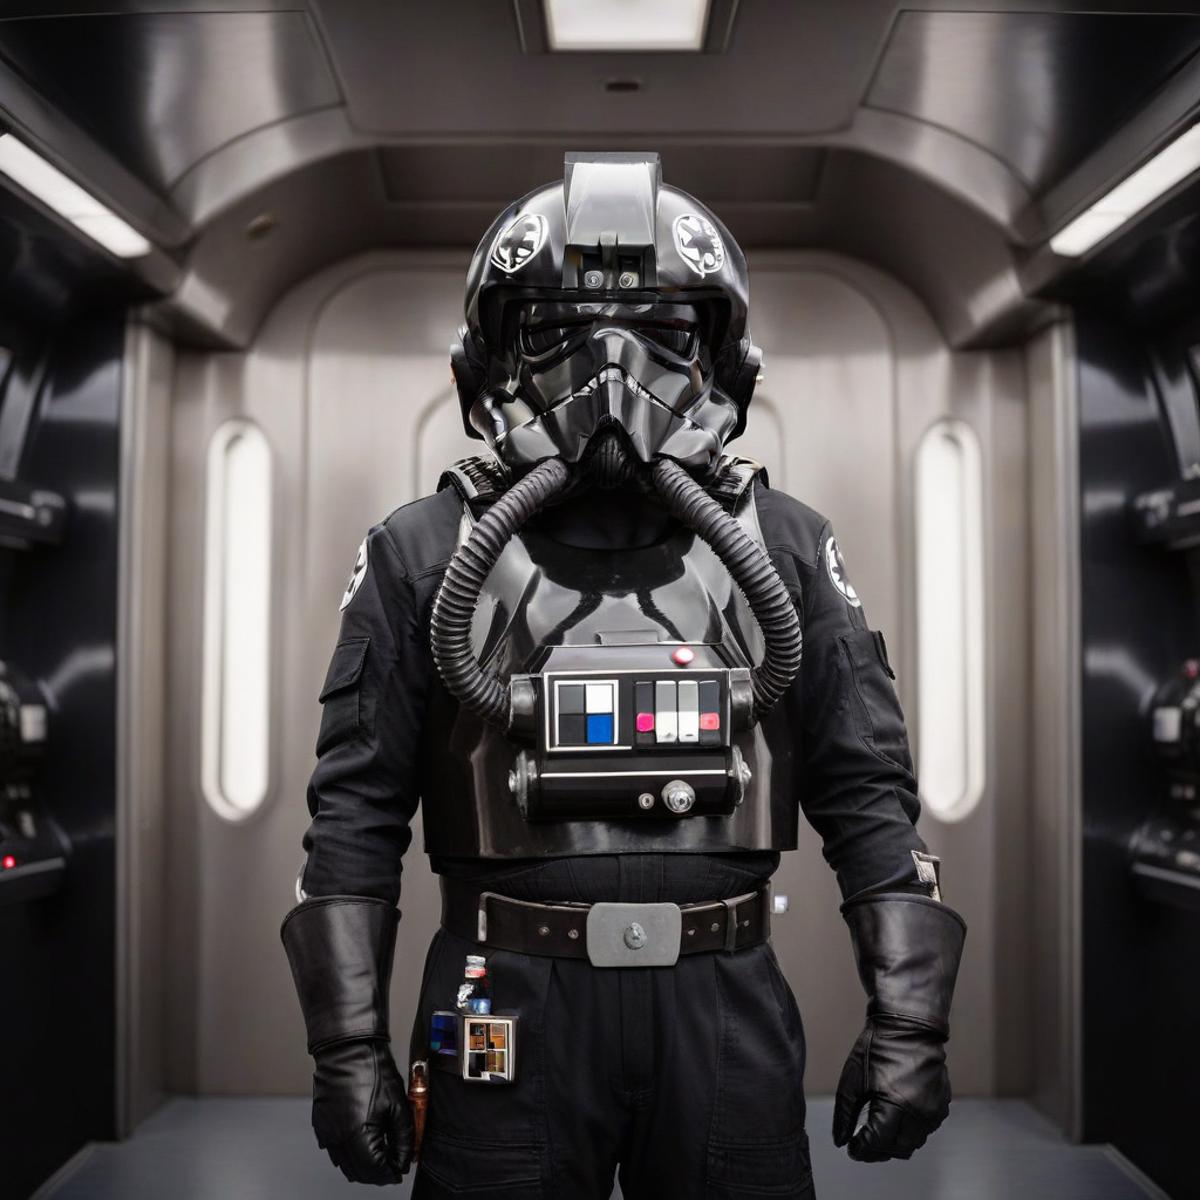 Imperial Tie Pilots (Star Wars) image by protongle